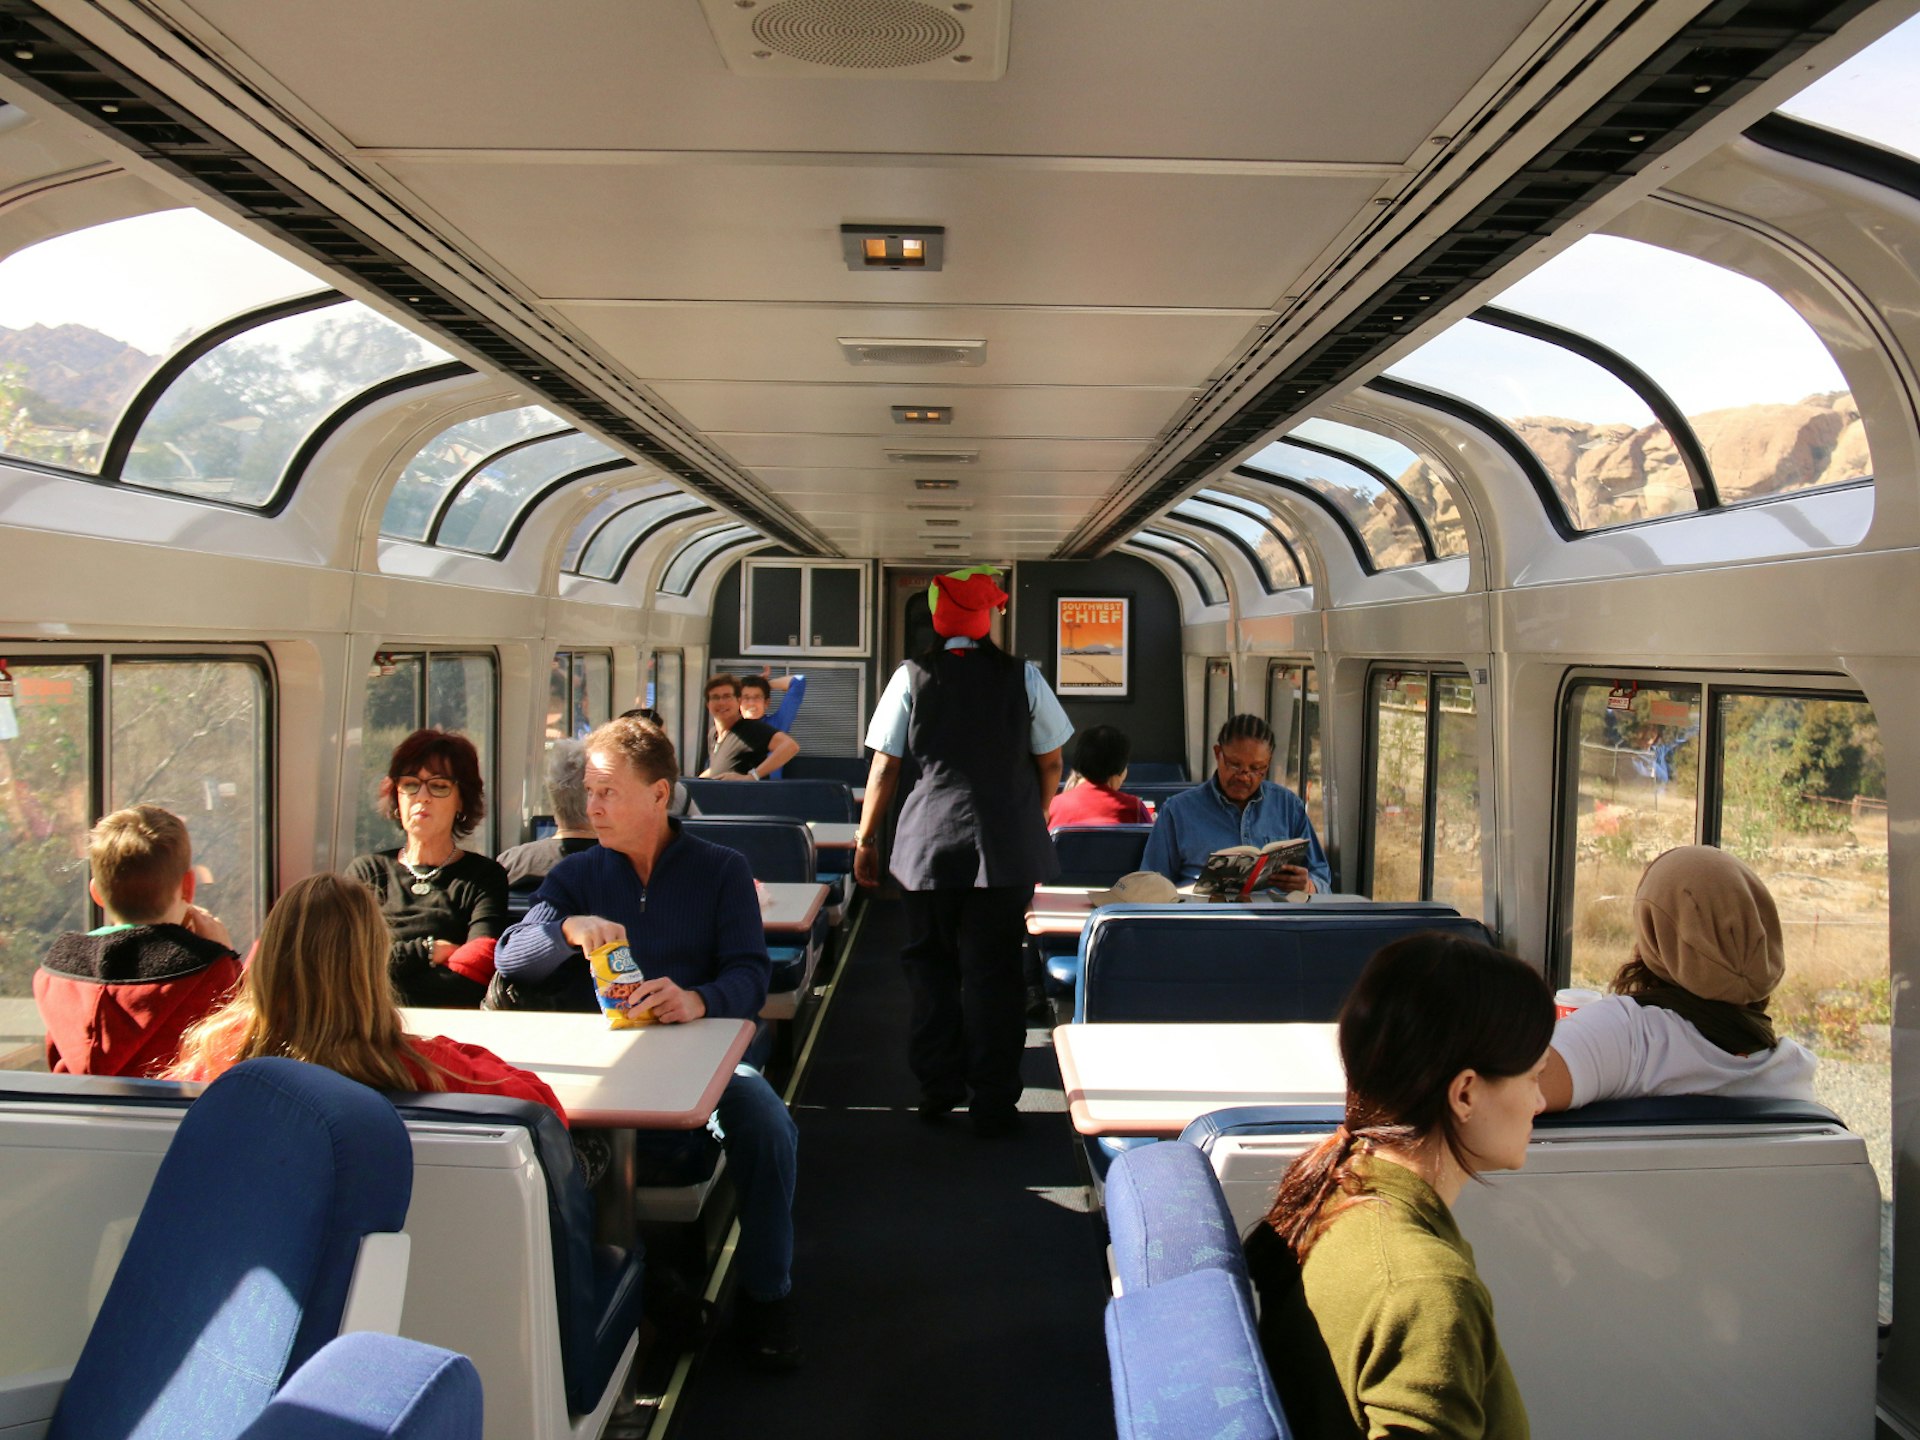 Passengers seated in a carriage of an Amtak train while an attendant stands in the middle aisle